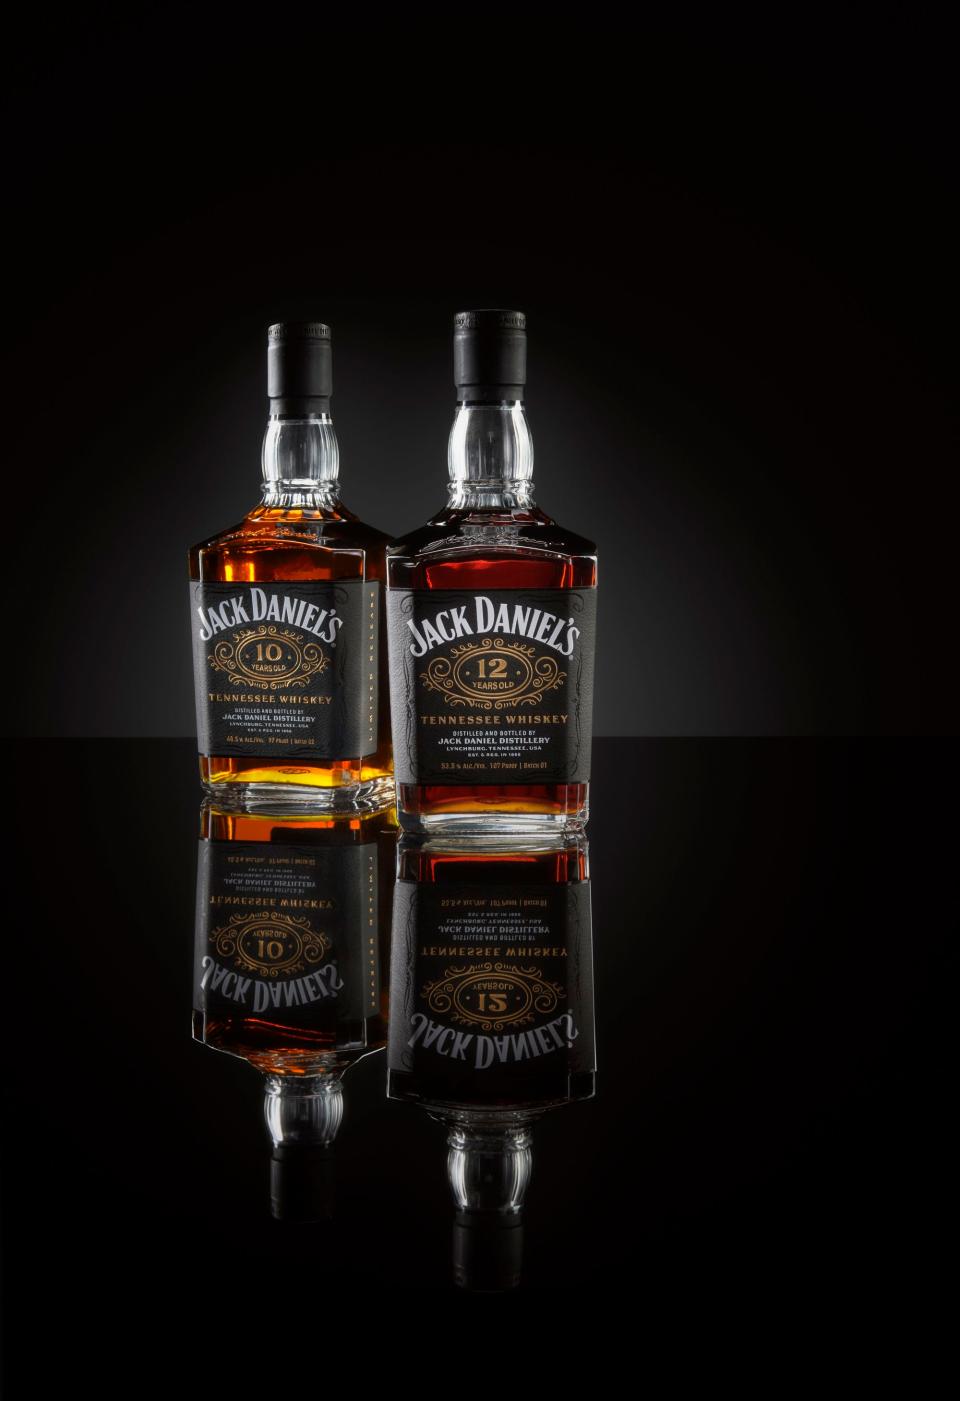 Jack Daniel's 10- and 12-year aged Tennessee whiskies.